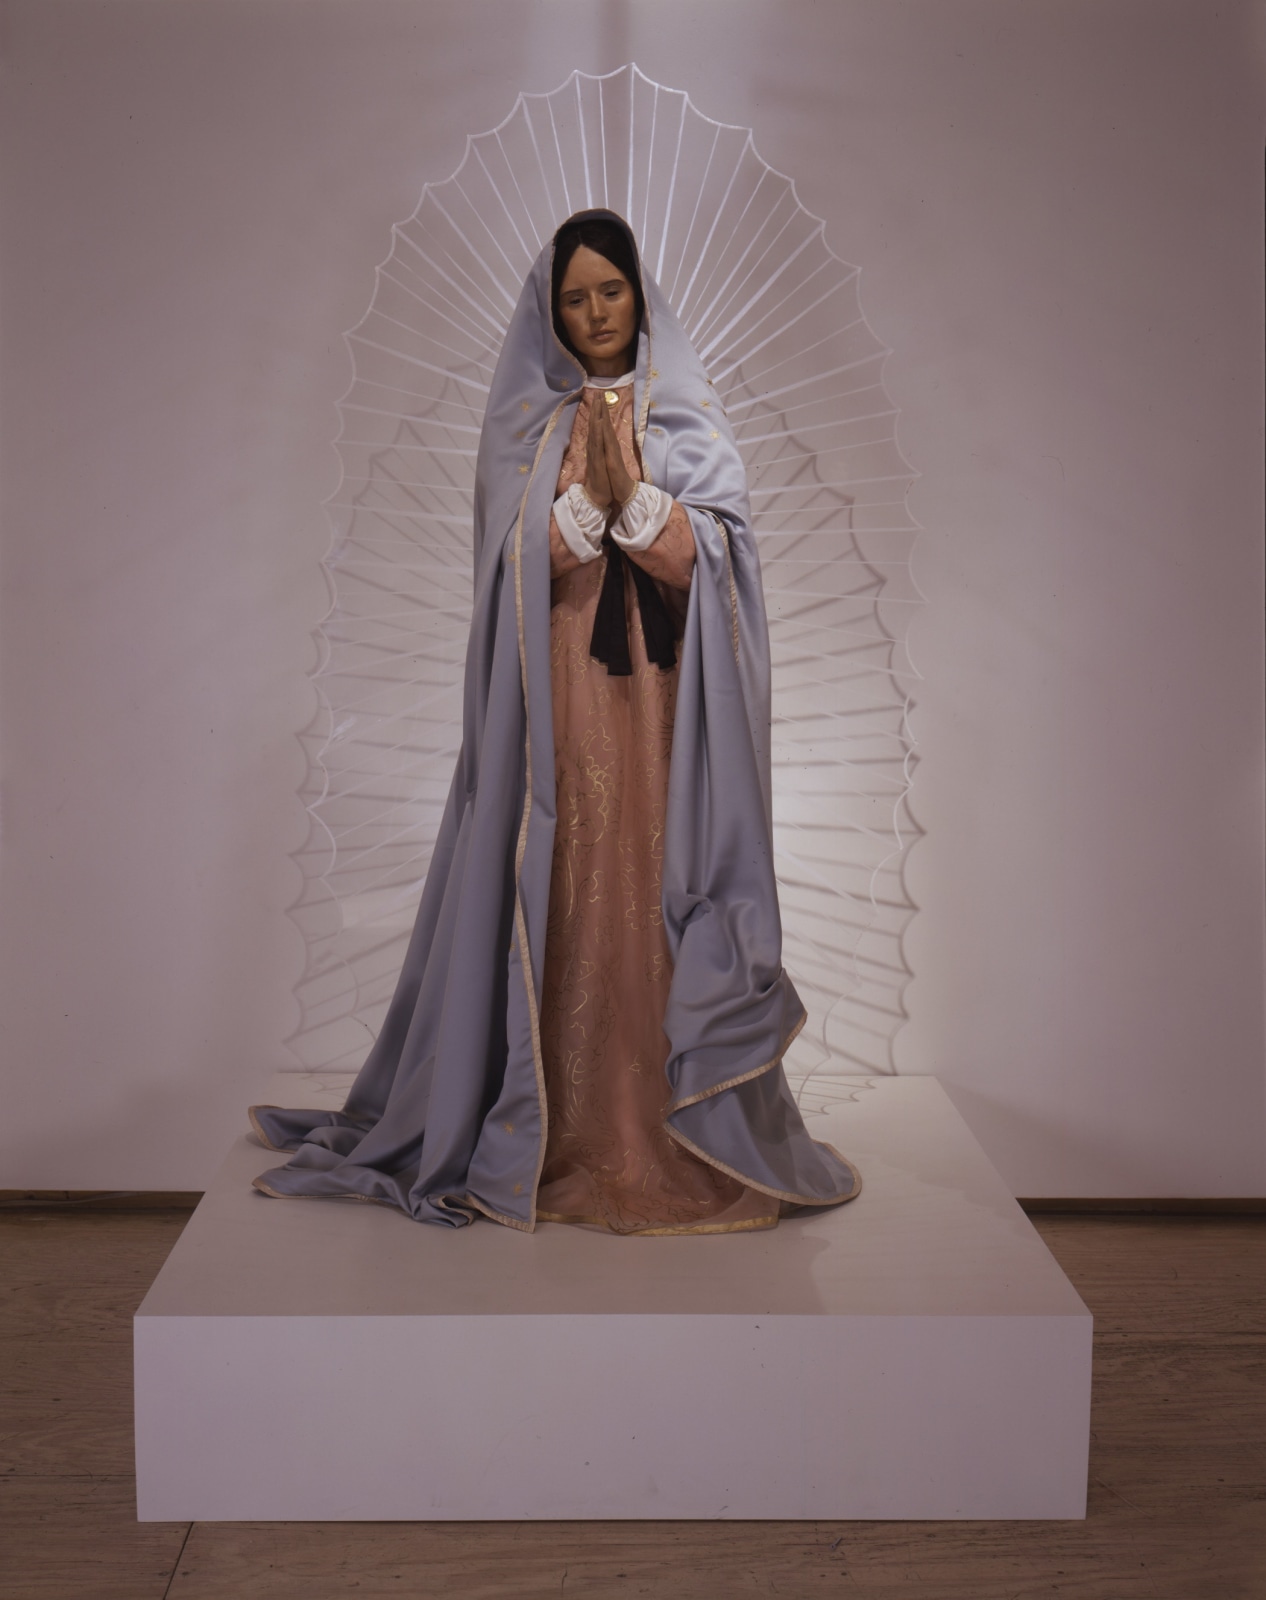 JEFFREY VALLANCE, The Virgin of Guadalupe, 2000